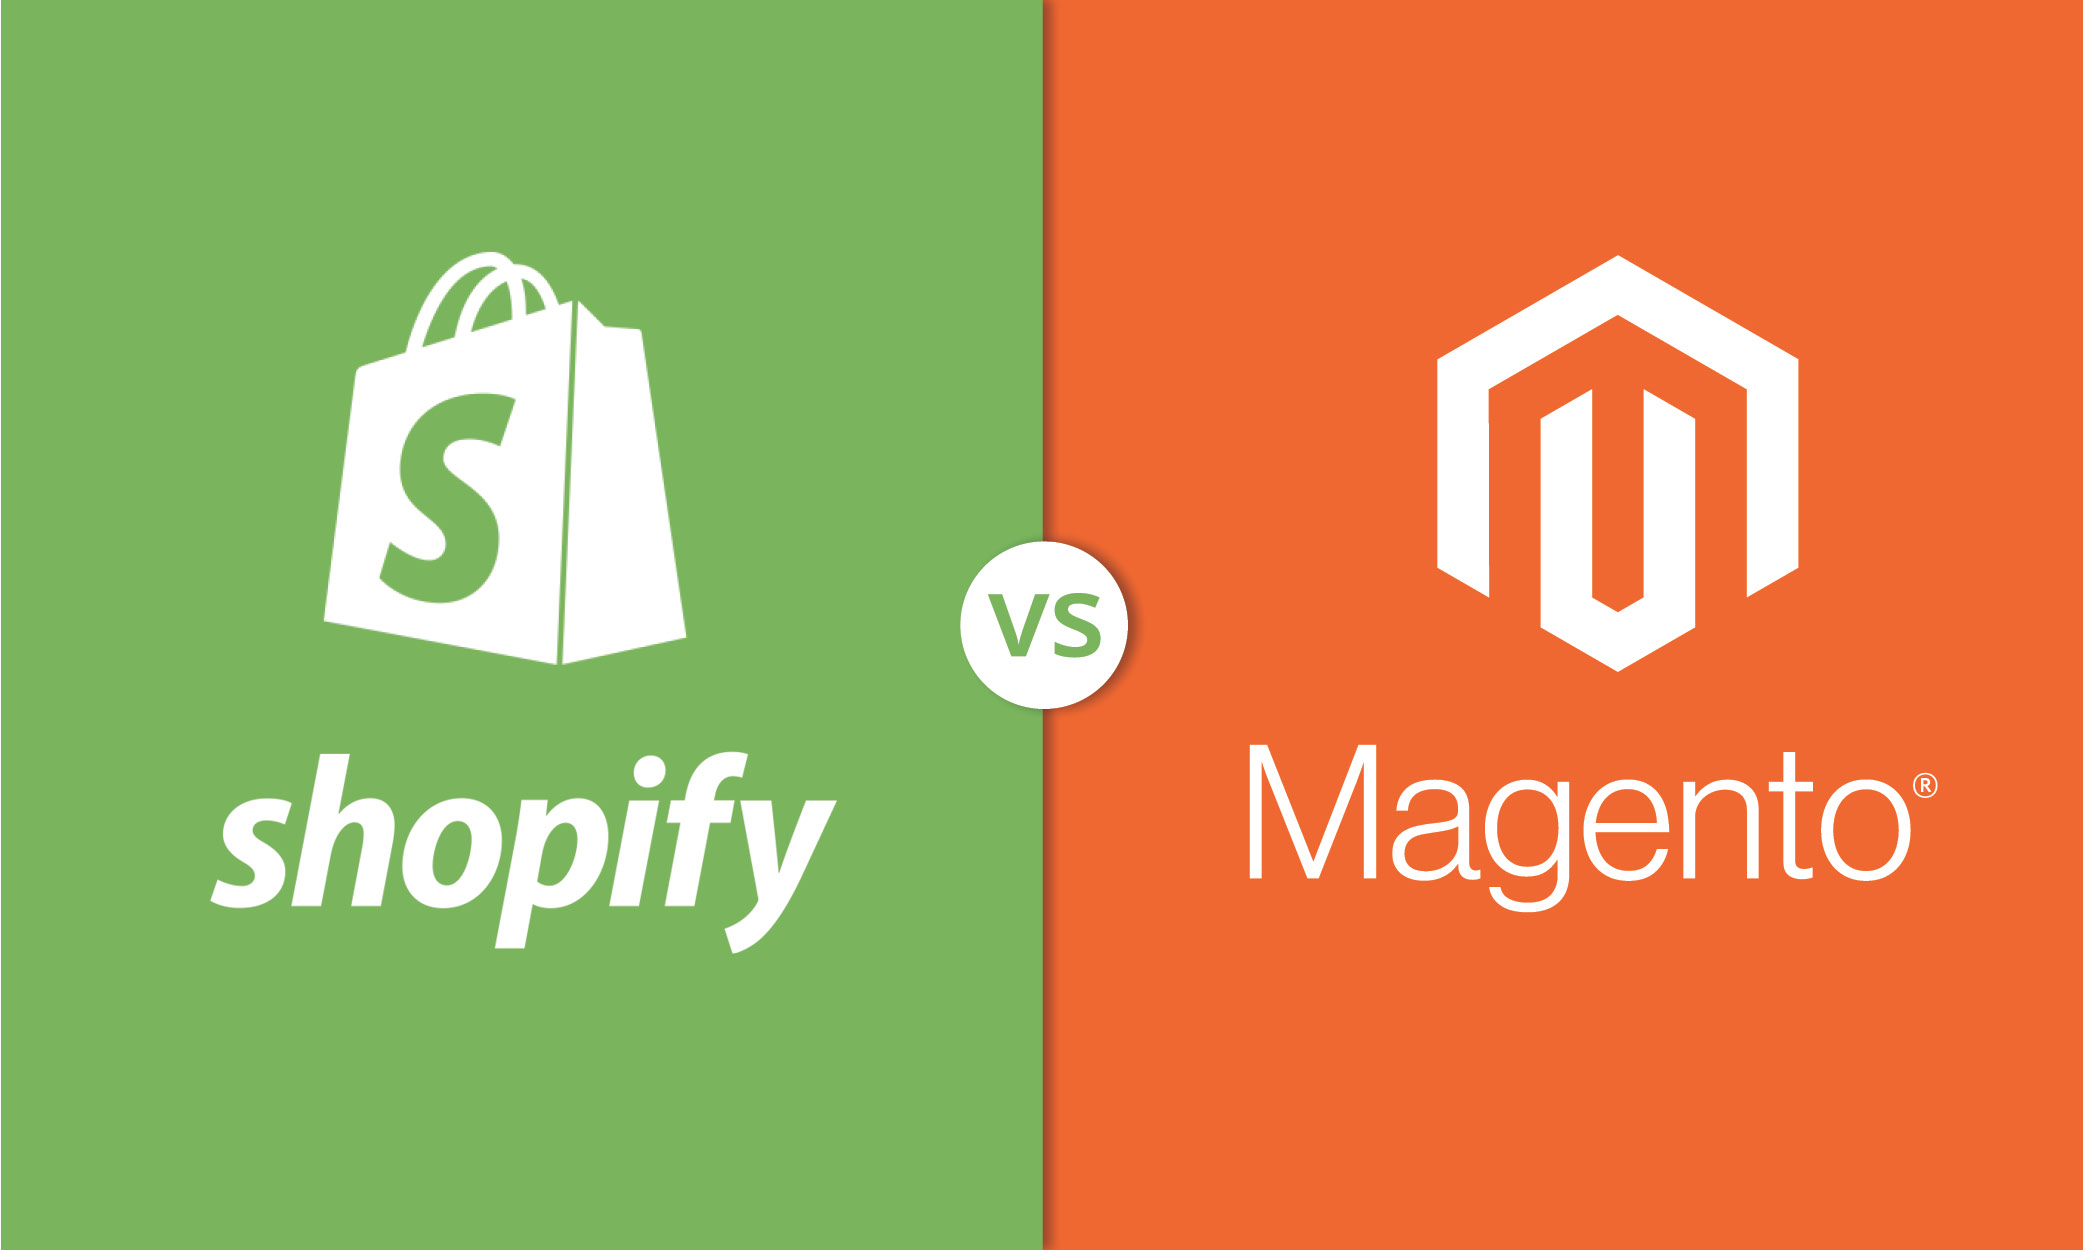 Magento vs. Shopify: Why Magento is the Better